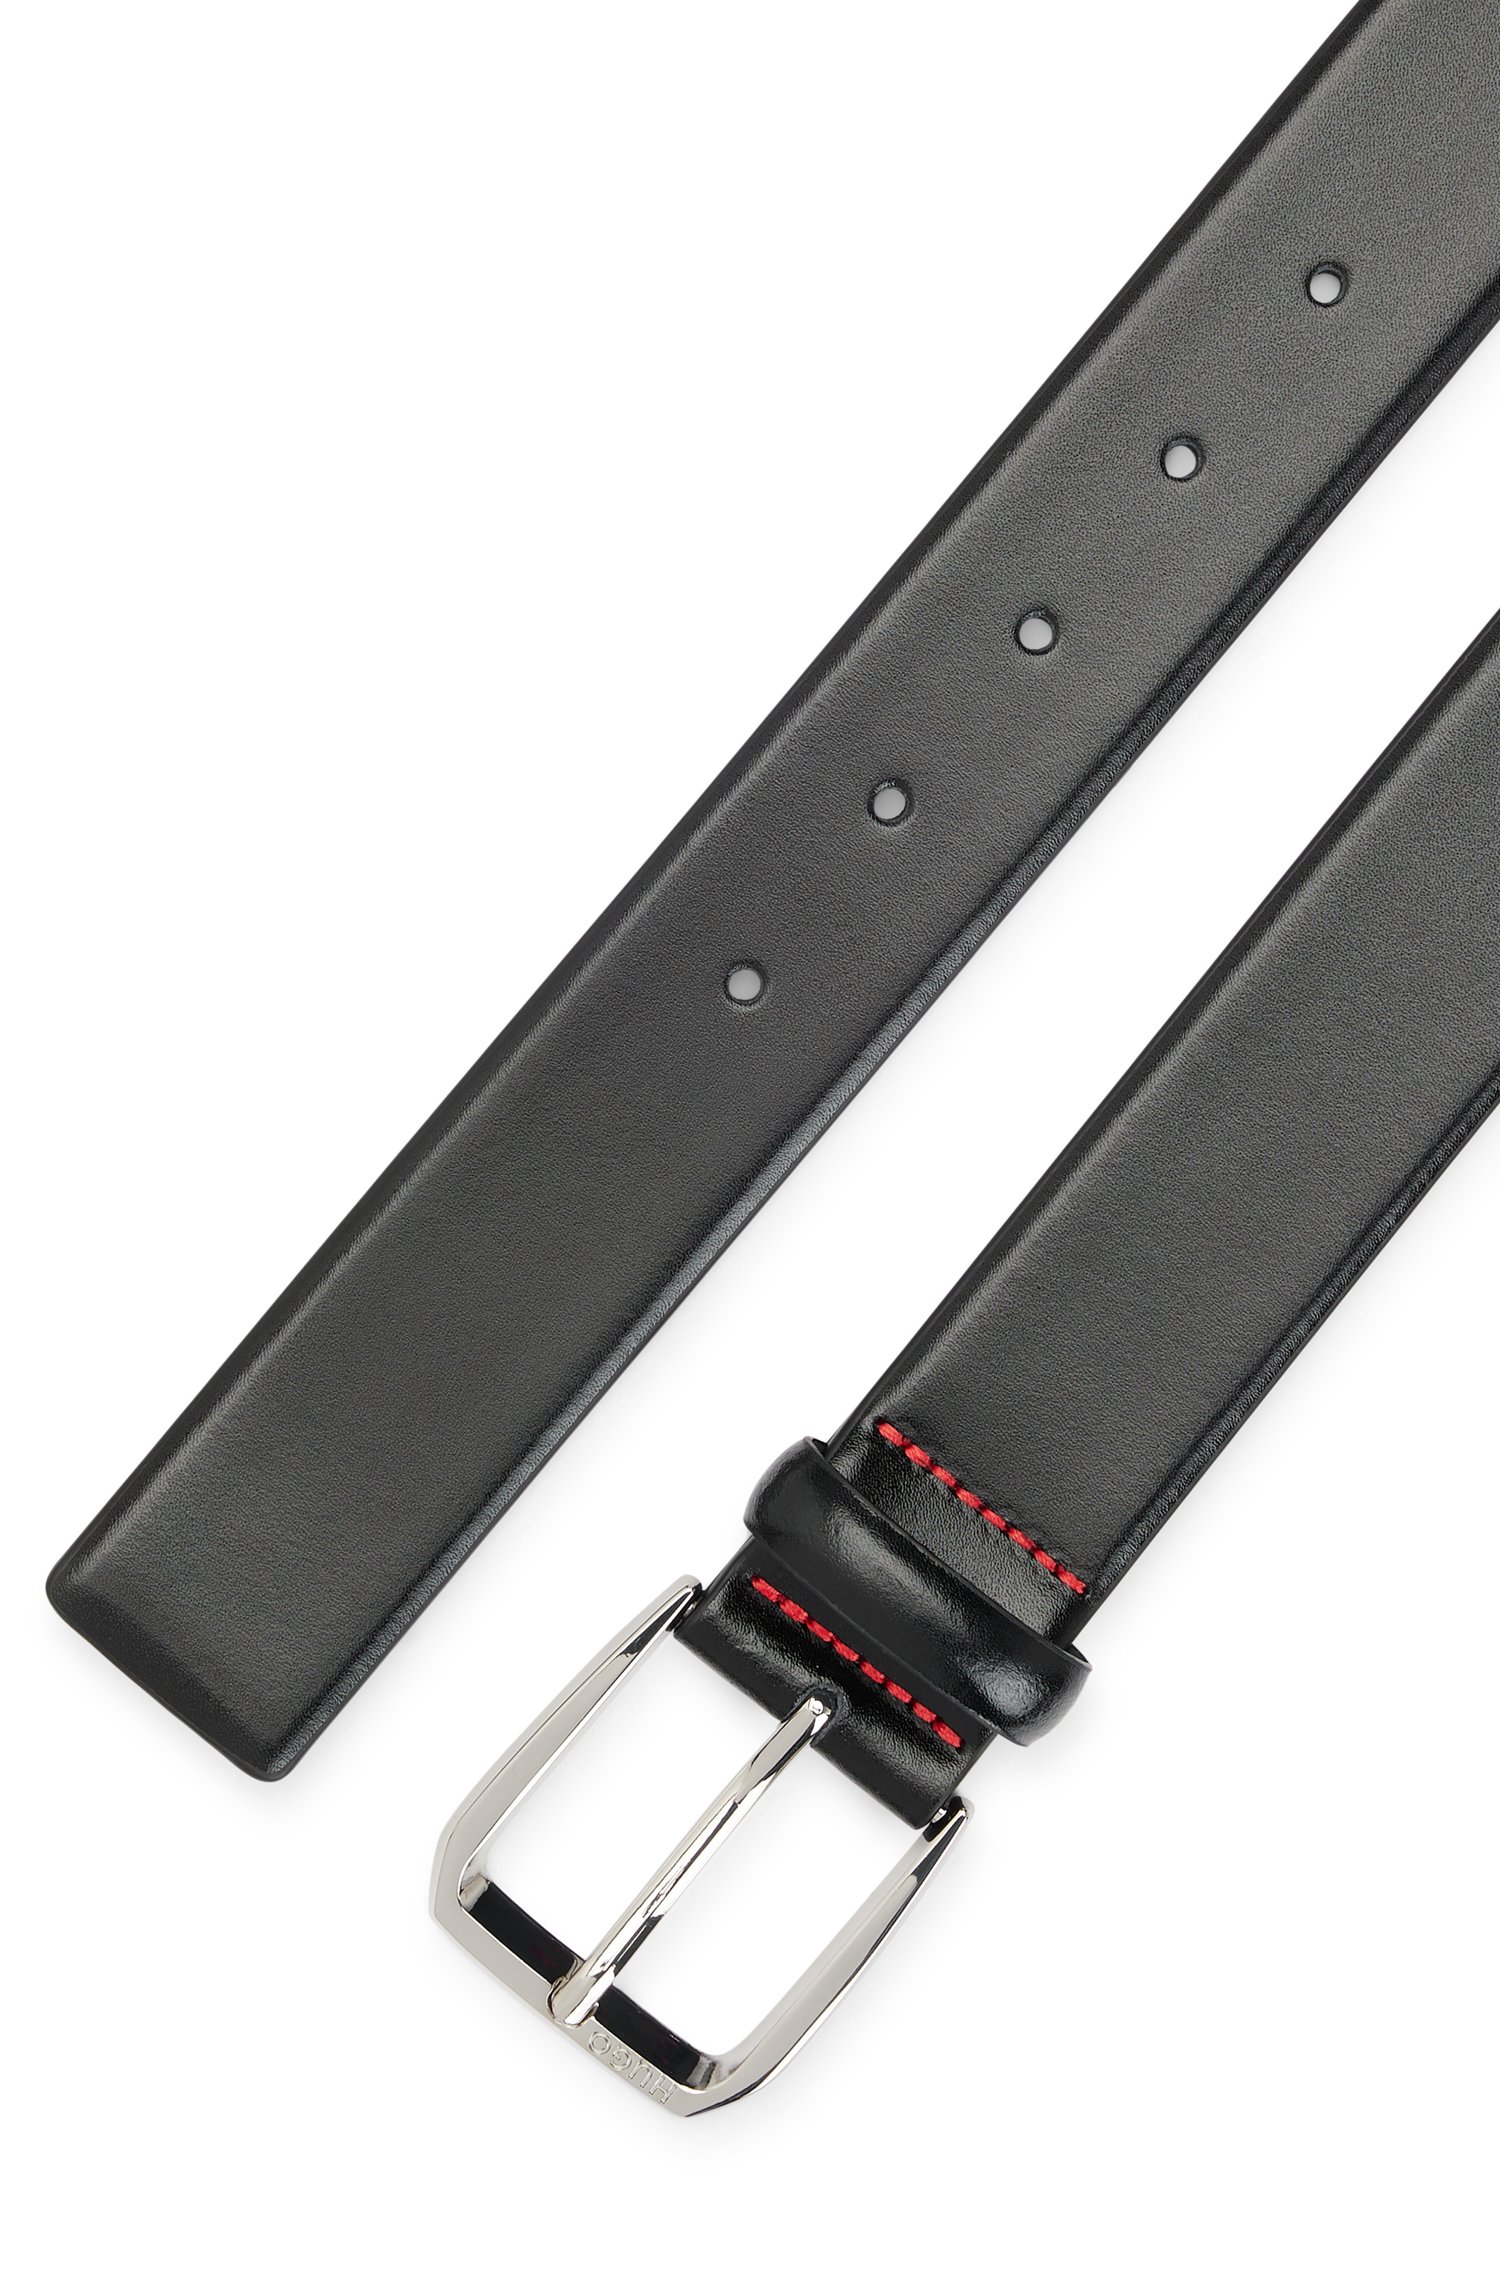 Italian-leather belt with branded buckle